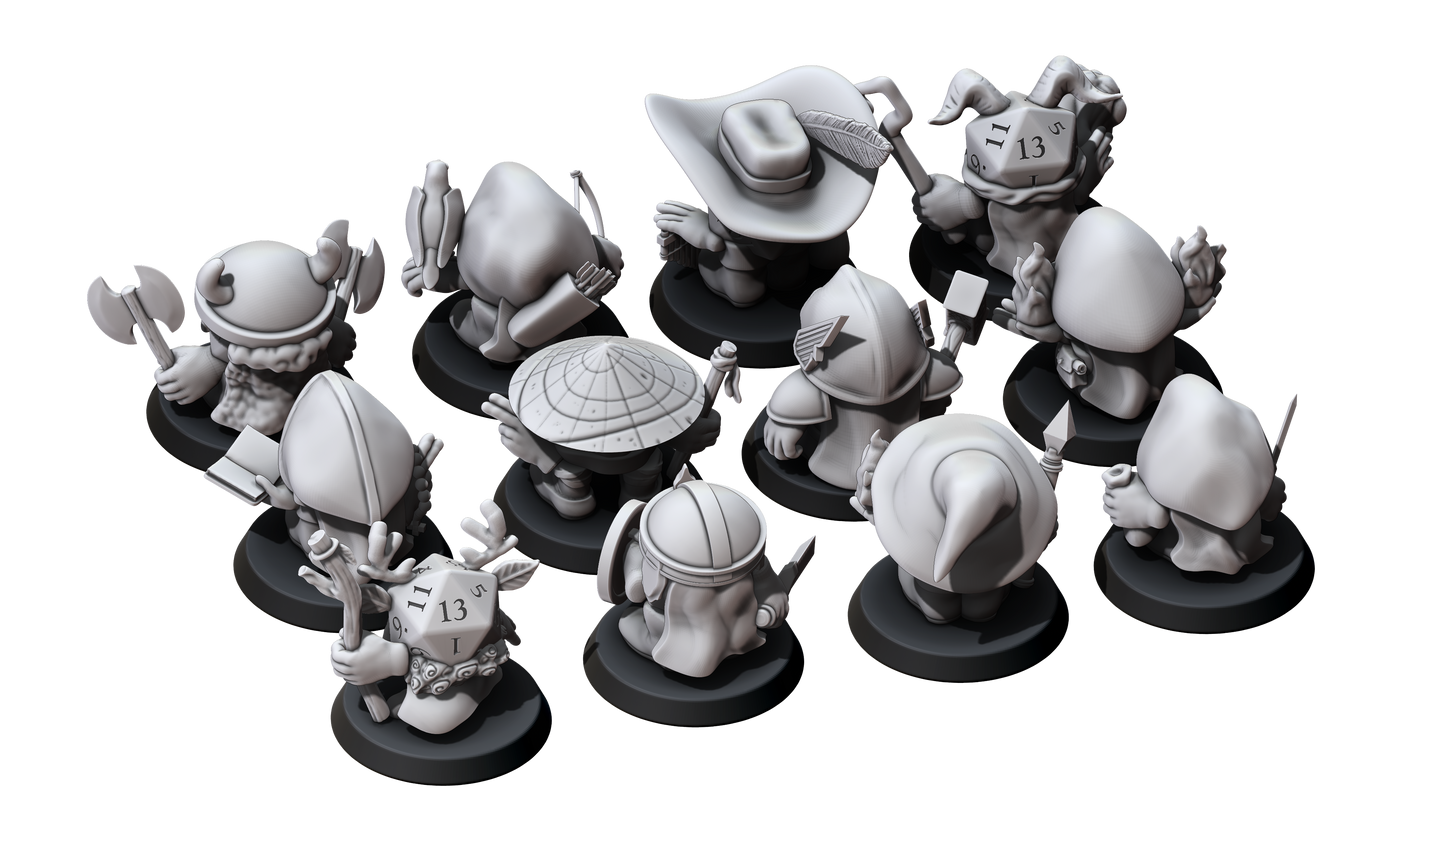 D20 Bakers Dozen Set, All 12 5e Classes Plus Artificer Construct Hero's (Small) by Minitaurus for Tabletop Games, Dioramas and Statues, Available in 15mm, 28mm, 32mm, 32mm heroic, 54mm and 75mm Statue Scale